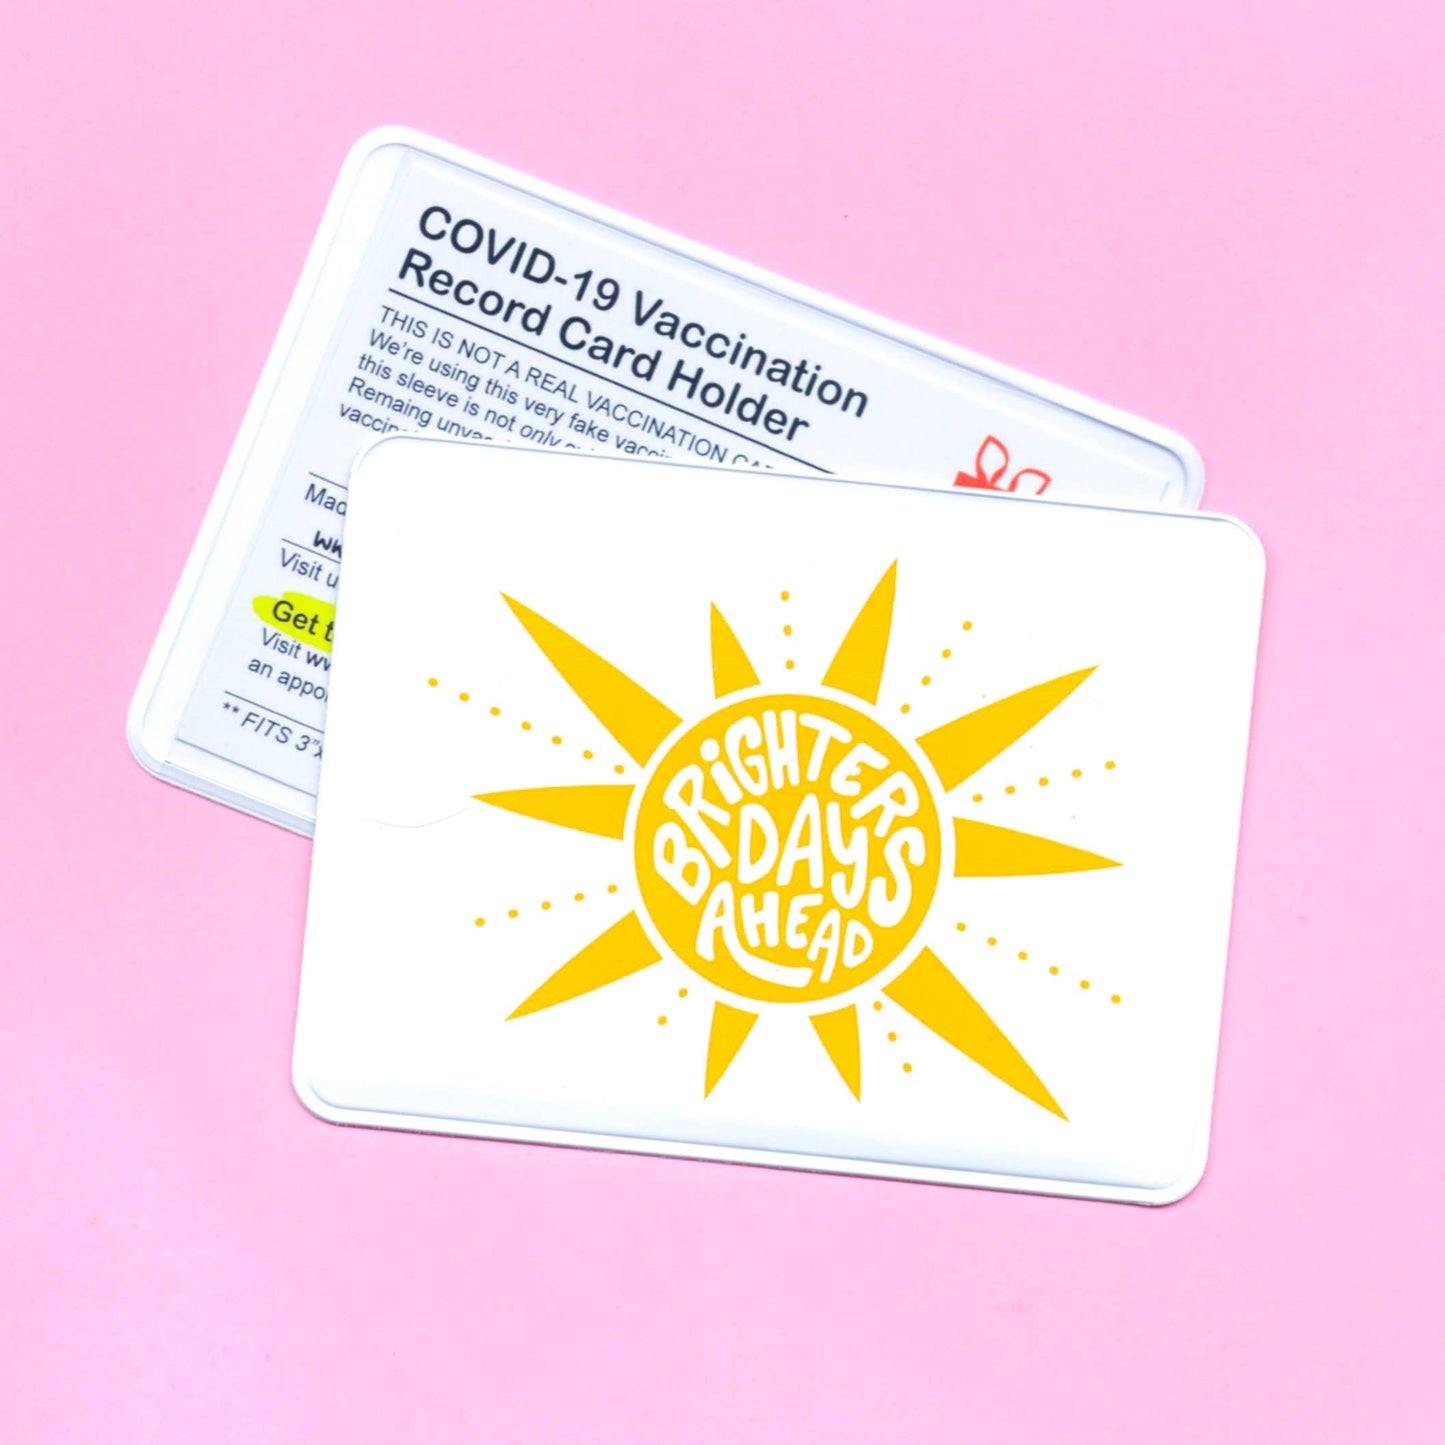 Brighter Days Ahead Vaccination Card Case/Holder